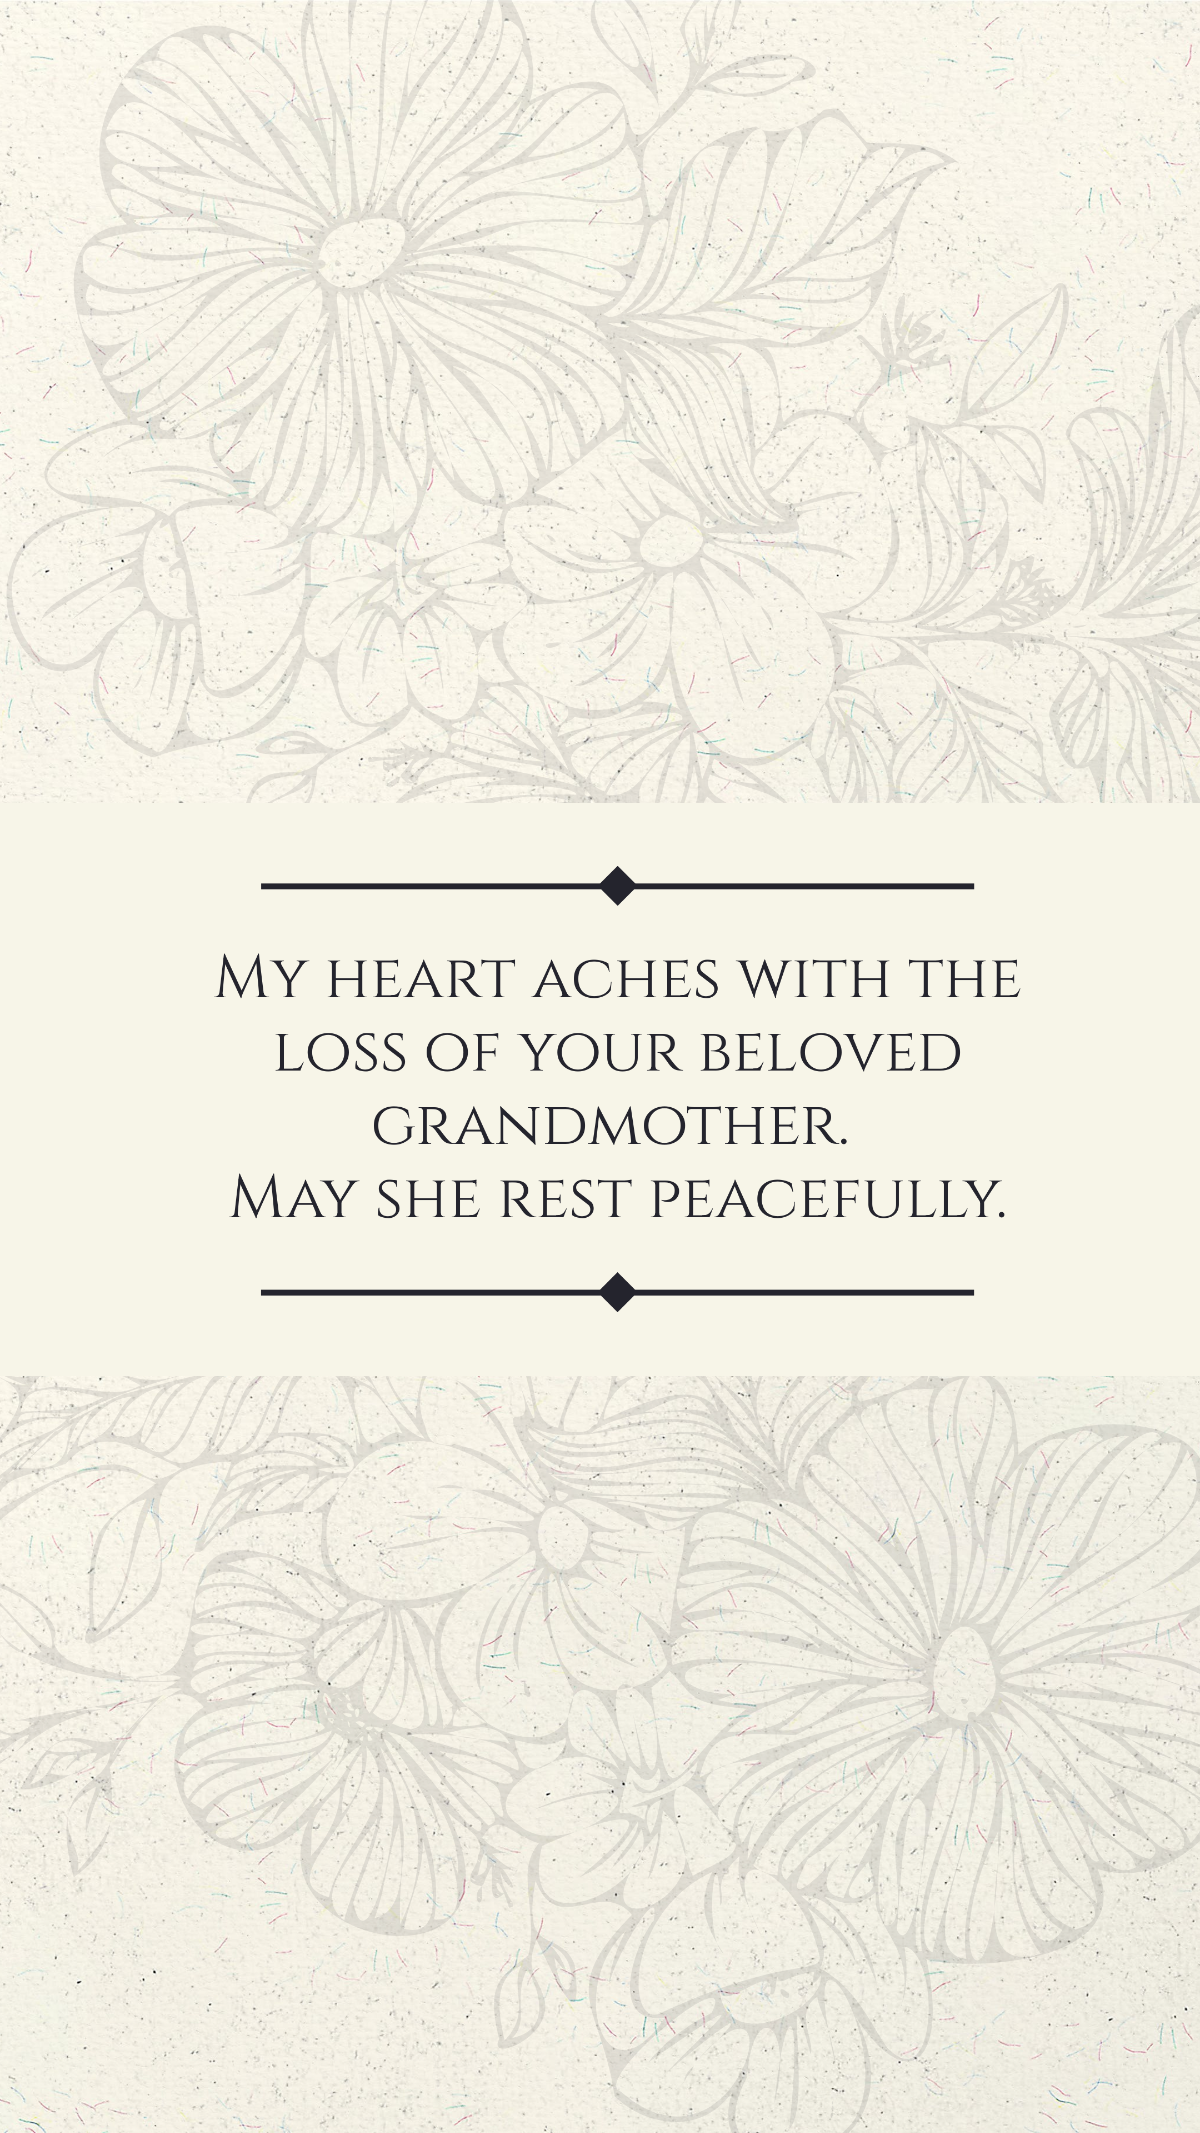 Condolence Message For Loss Of Grandmother